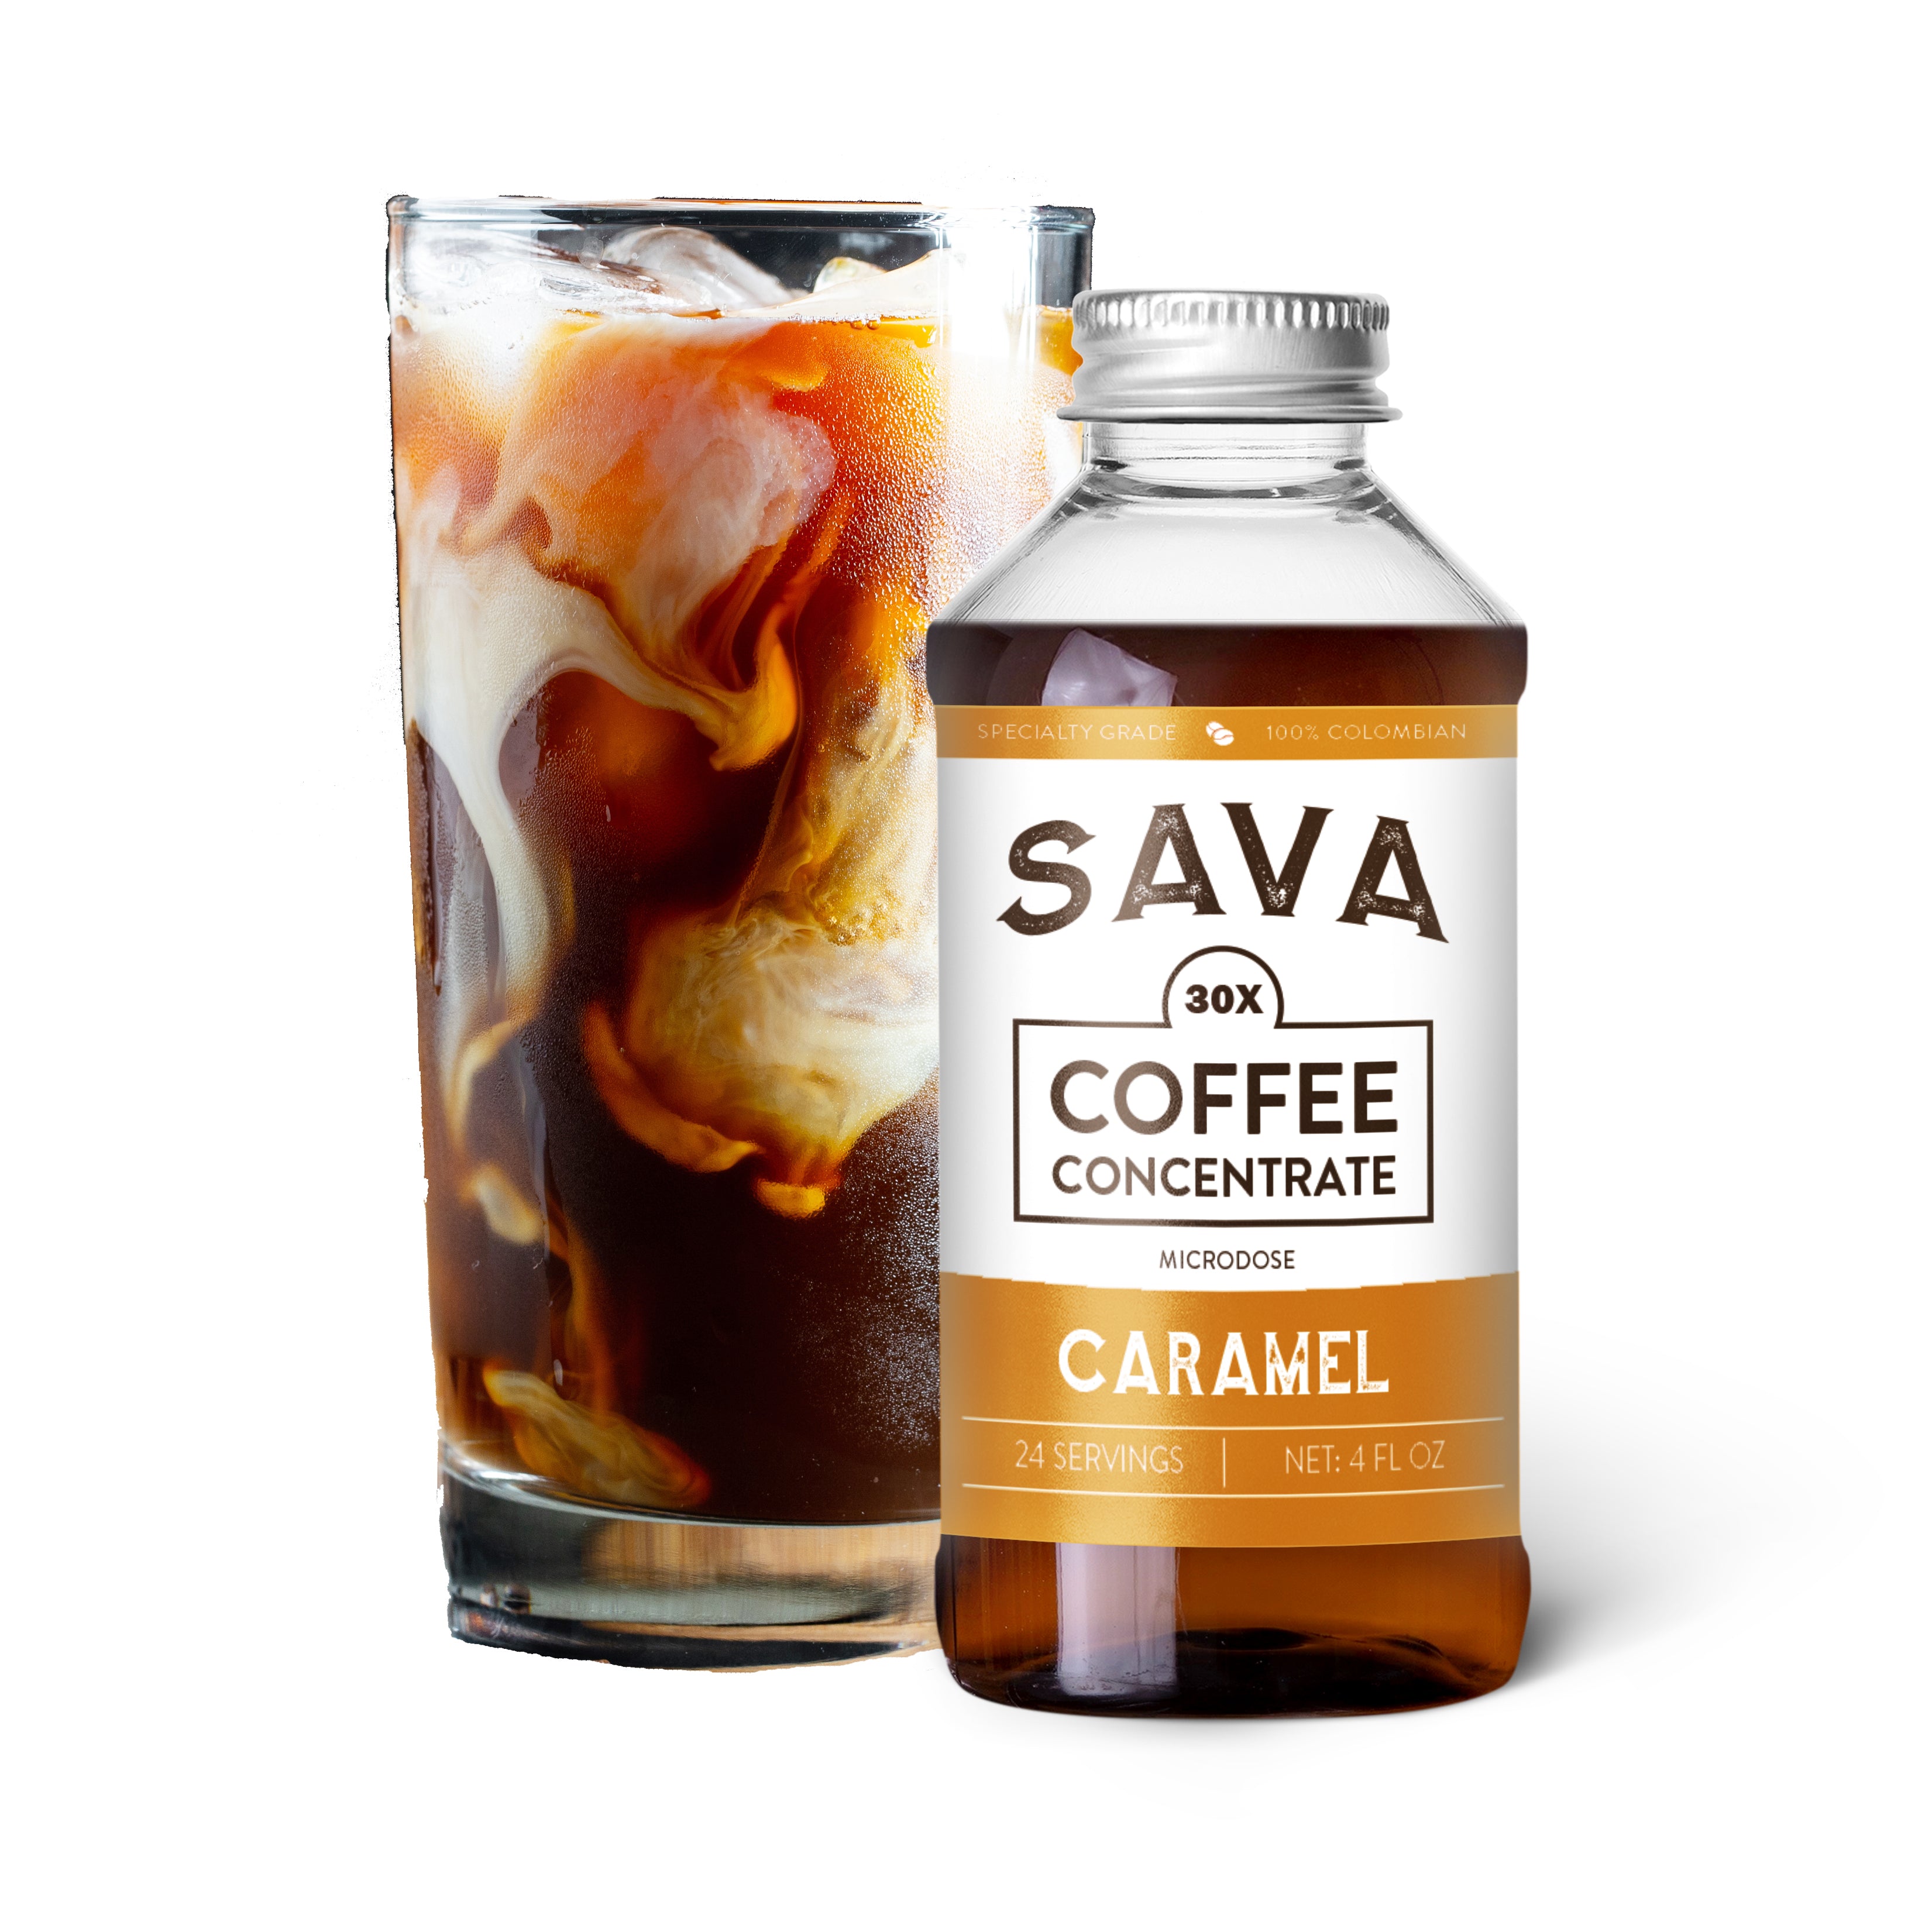 SAVA Cold Brew Coffee Concentrate 30X - Carmel 4 ounce volume